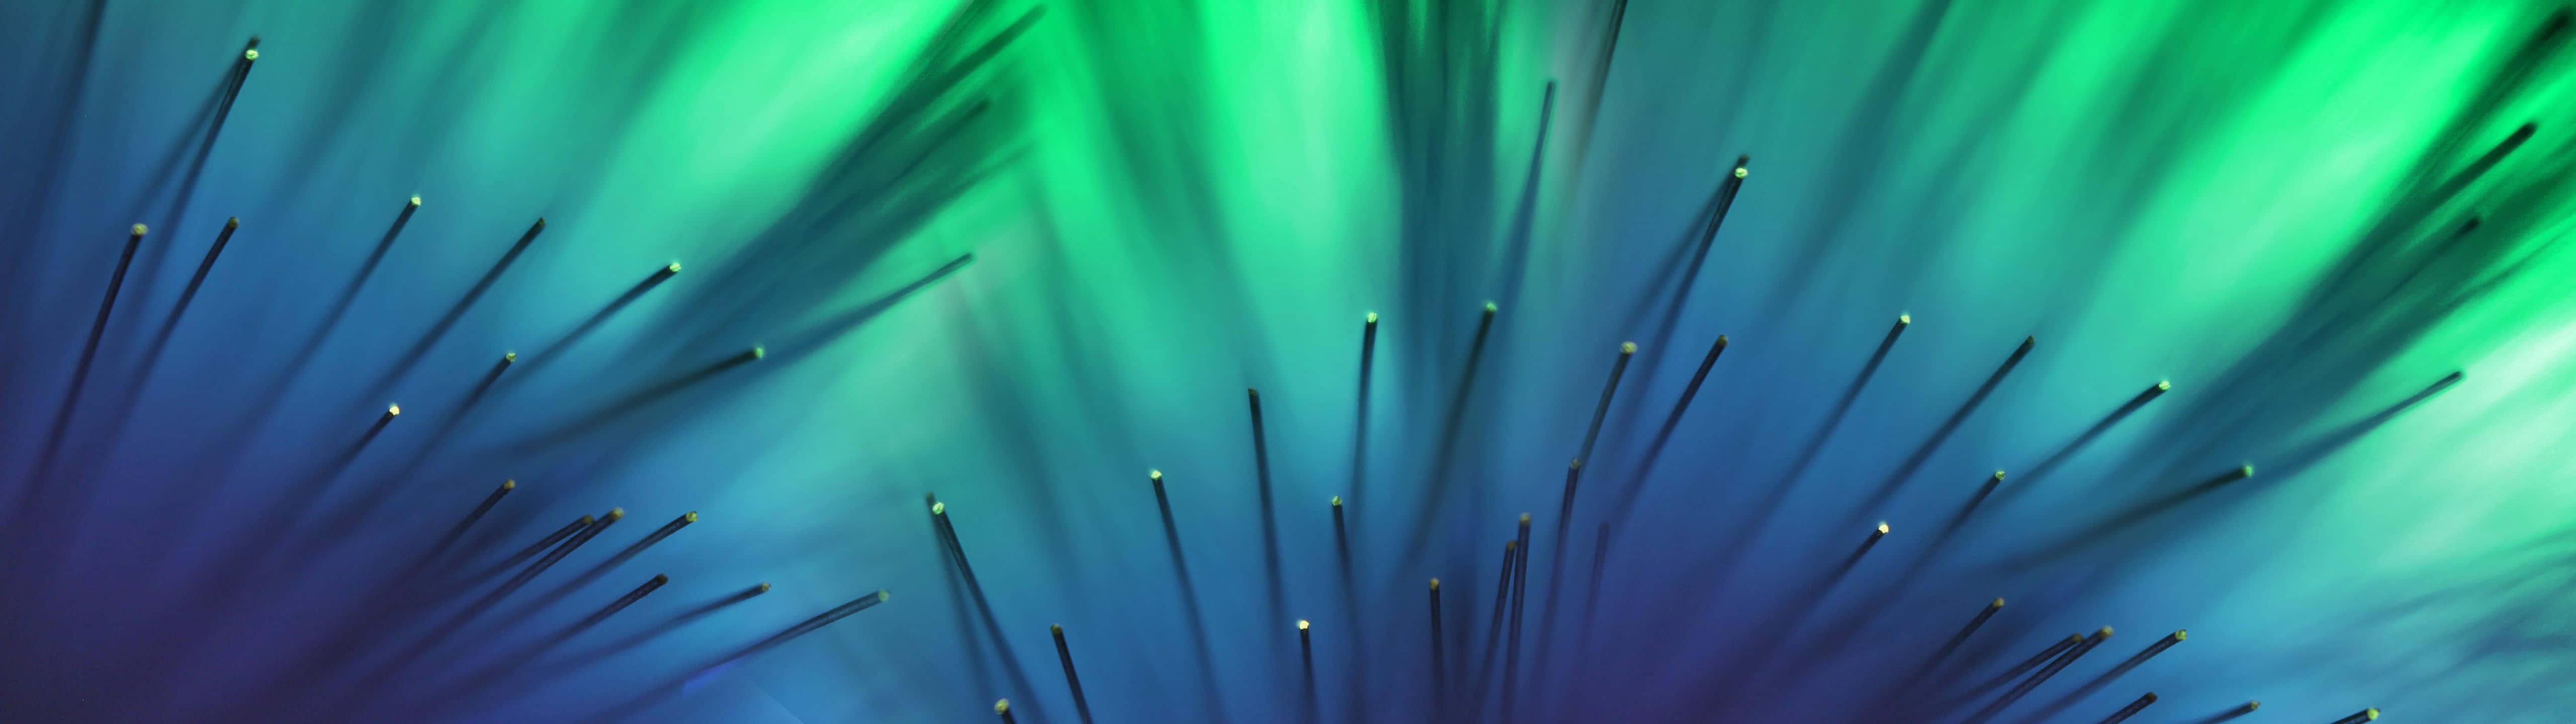 A Green And Blue Background With A Lot Of Spikes Wallpaper